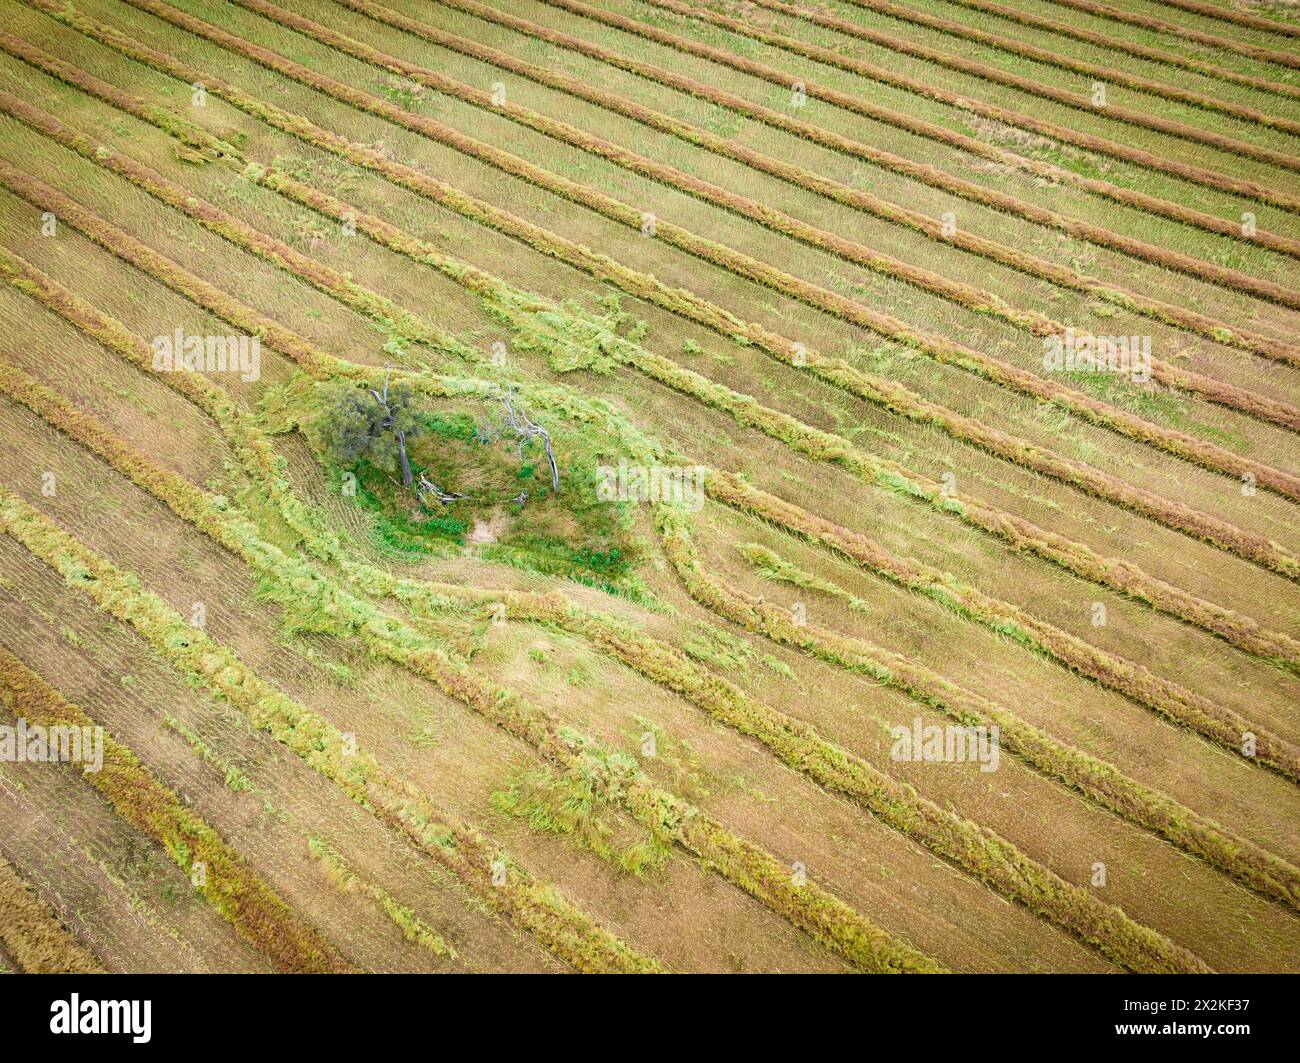 Aerial view of harvester patterns around trees on farmland at Joyces Creek in Central Victoria, Australia Stock Photo